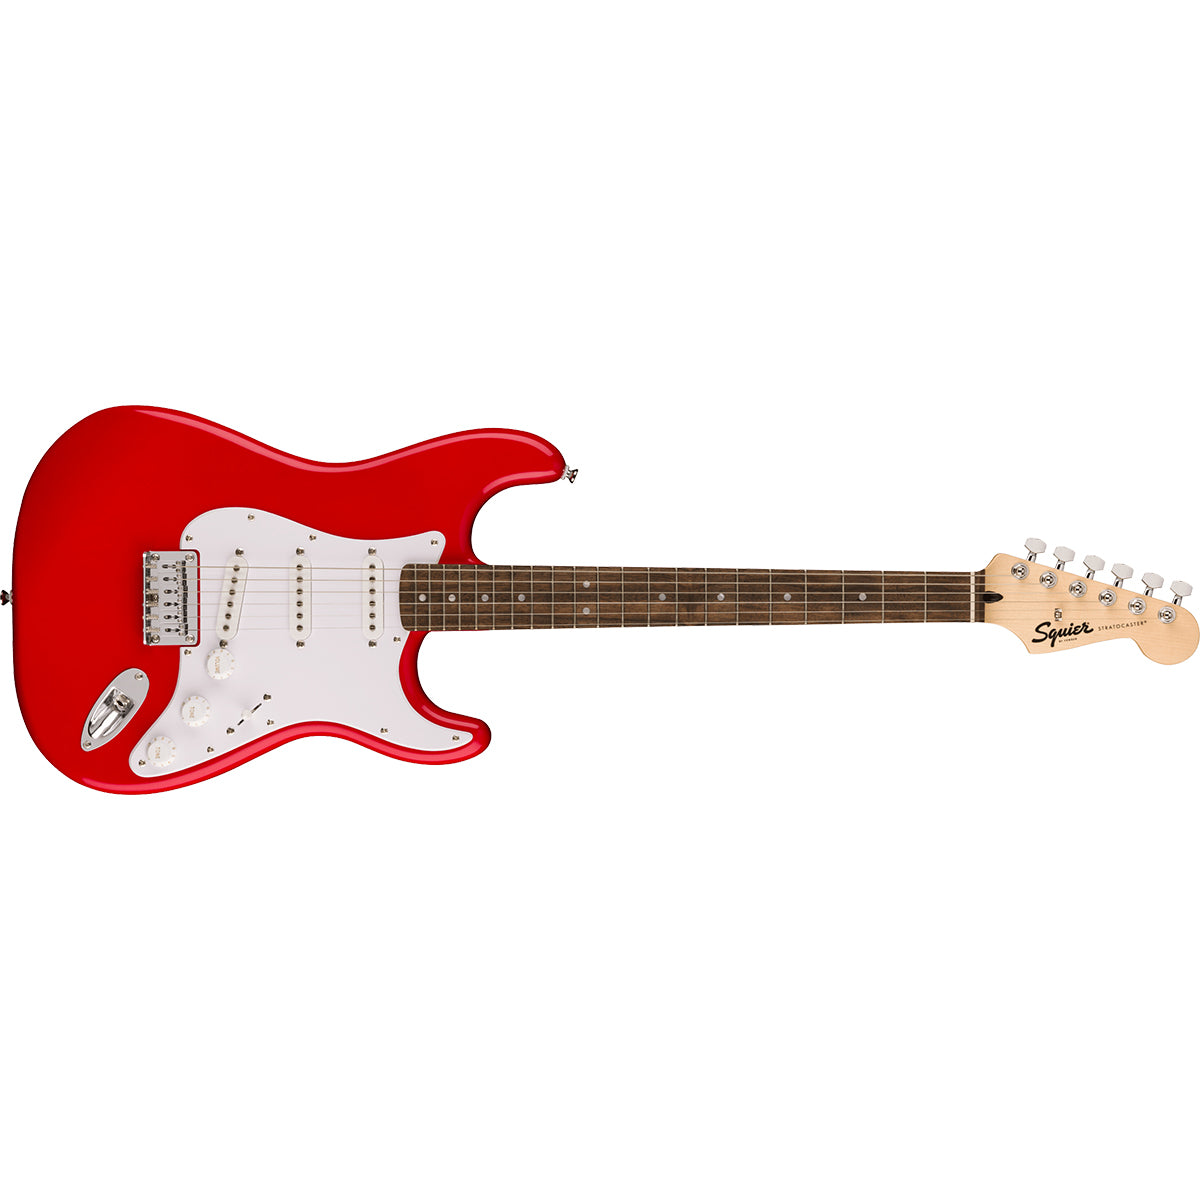 Fender Squier Sonic Stratocaster HT Electric Guitar Torino Red - 0373250558